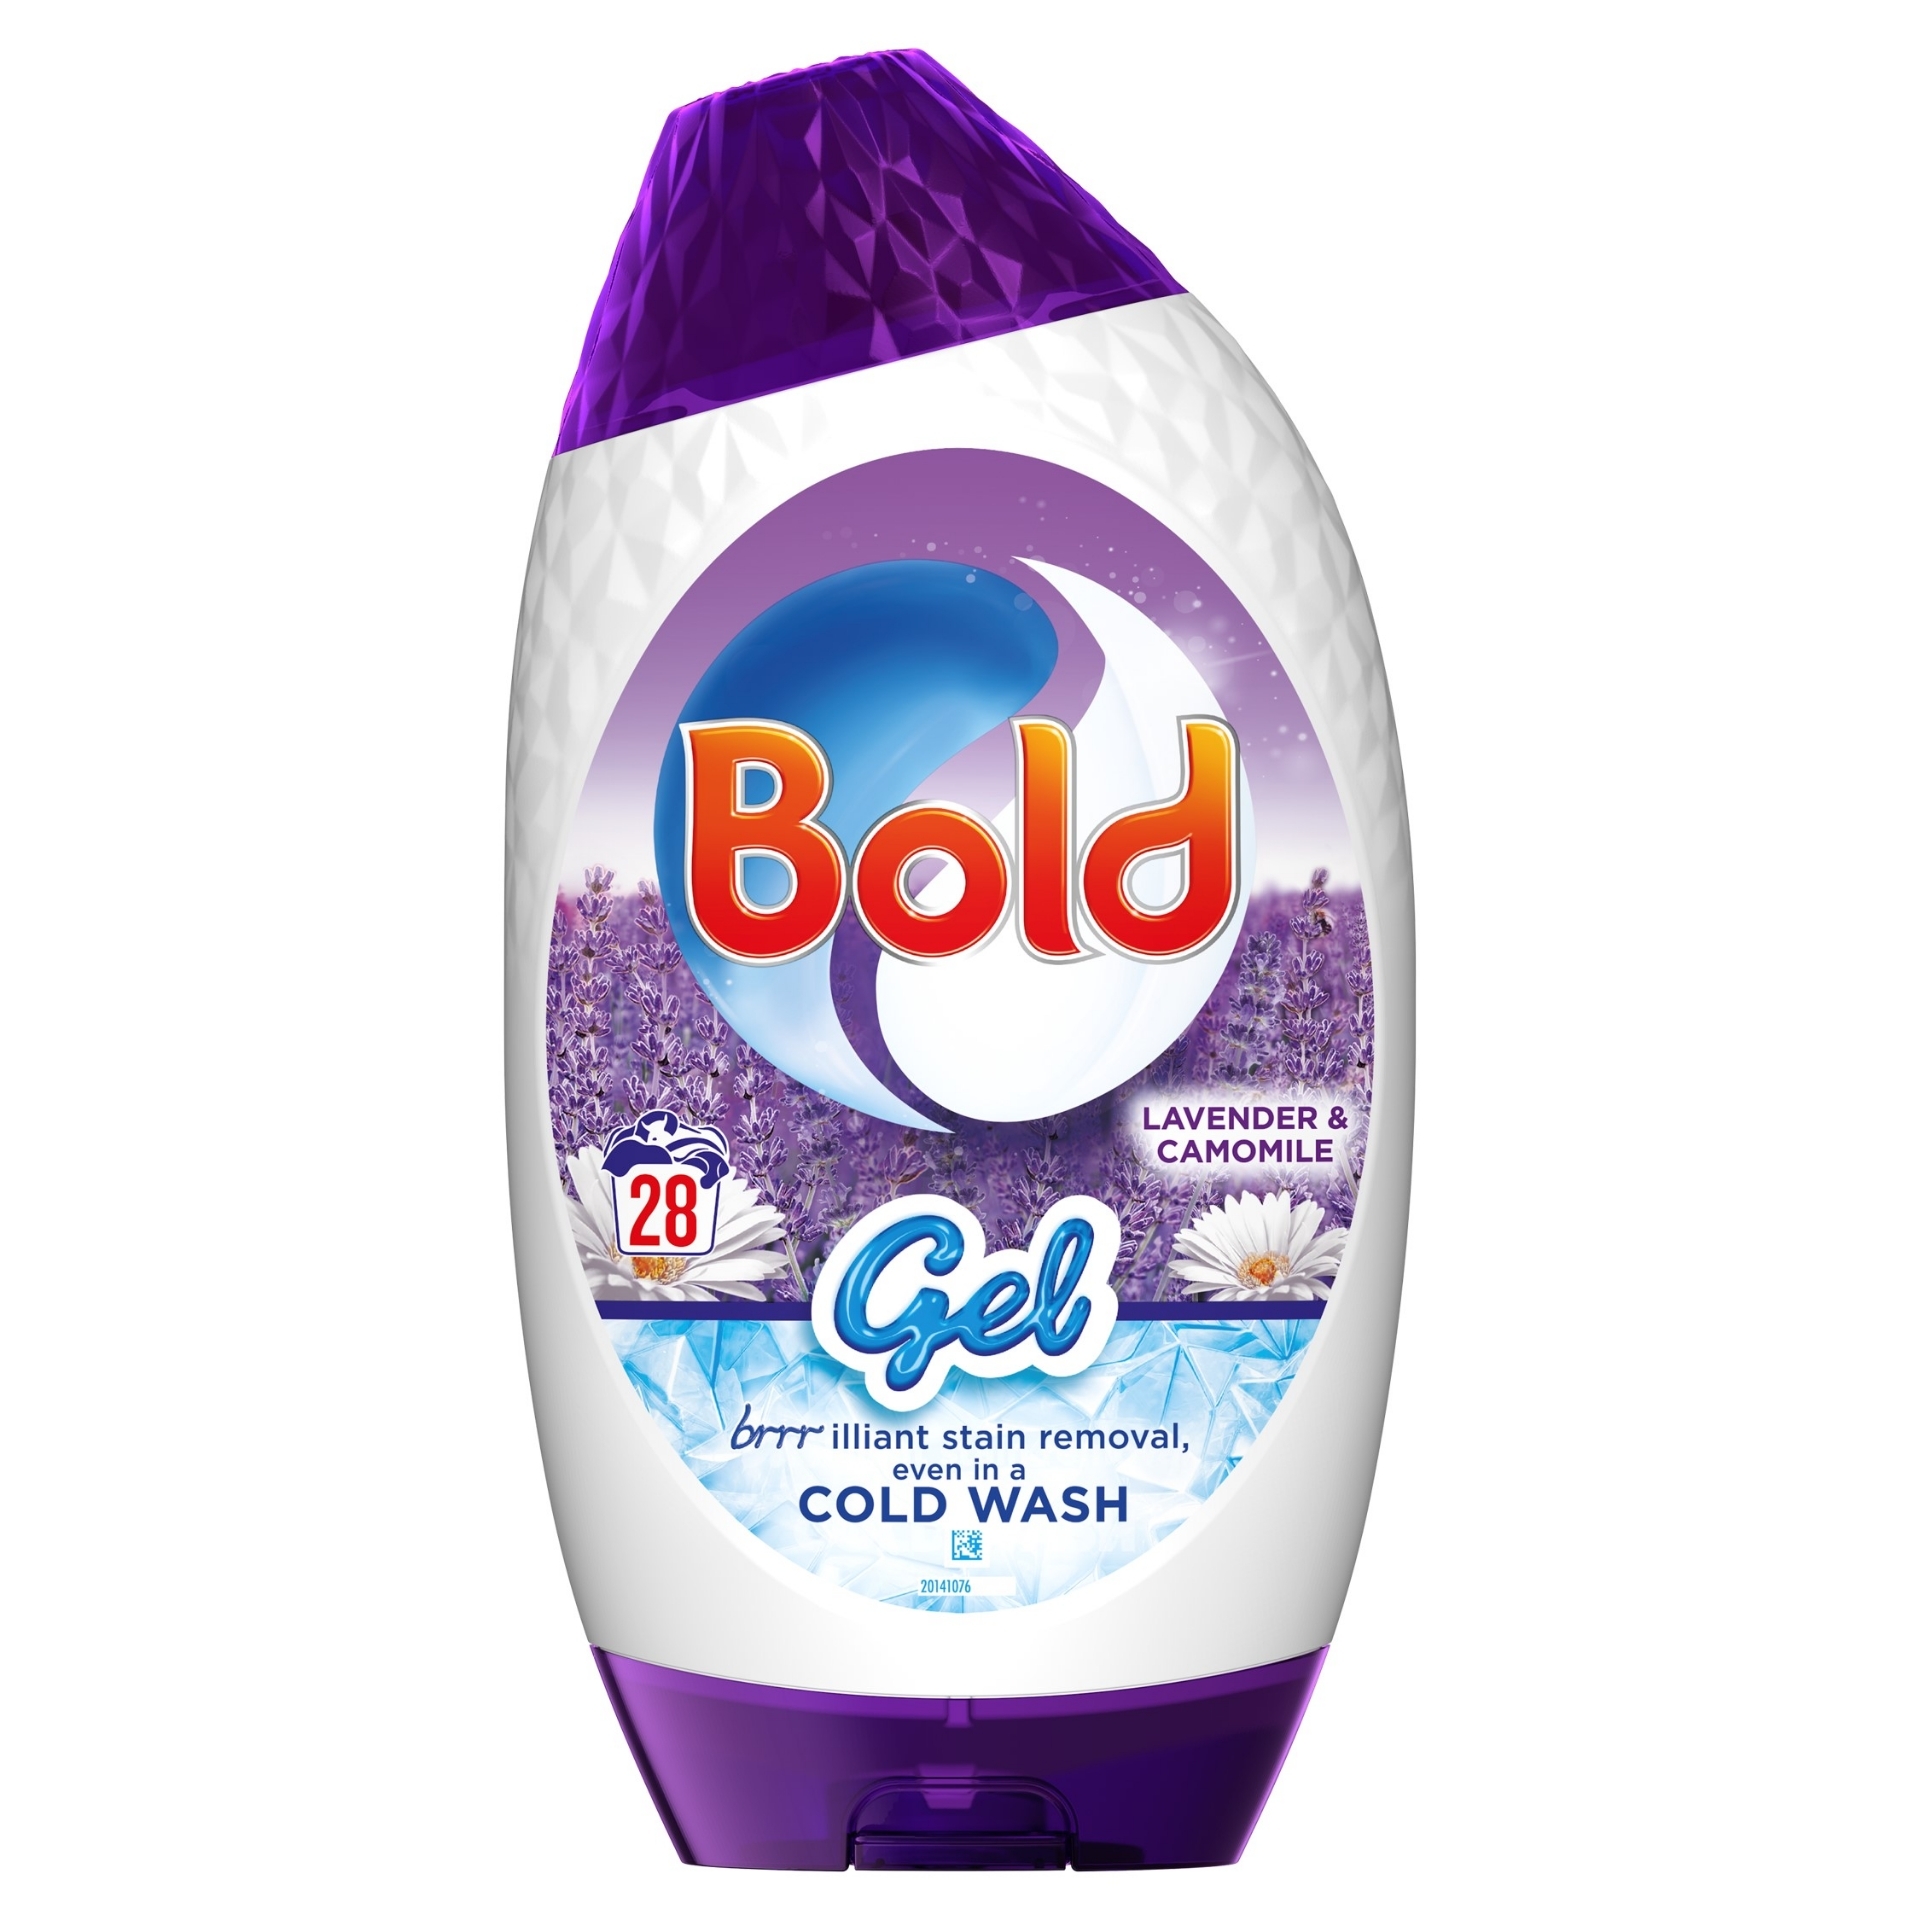 Picture of BOLD 2in1 LIQUID GEL - LAVEN & CAM (28w)(wsl)CO:FR